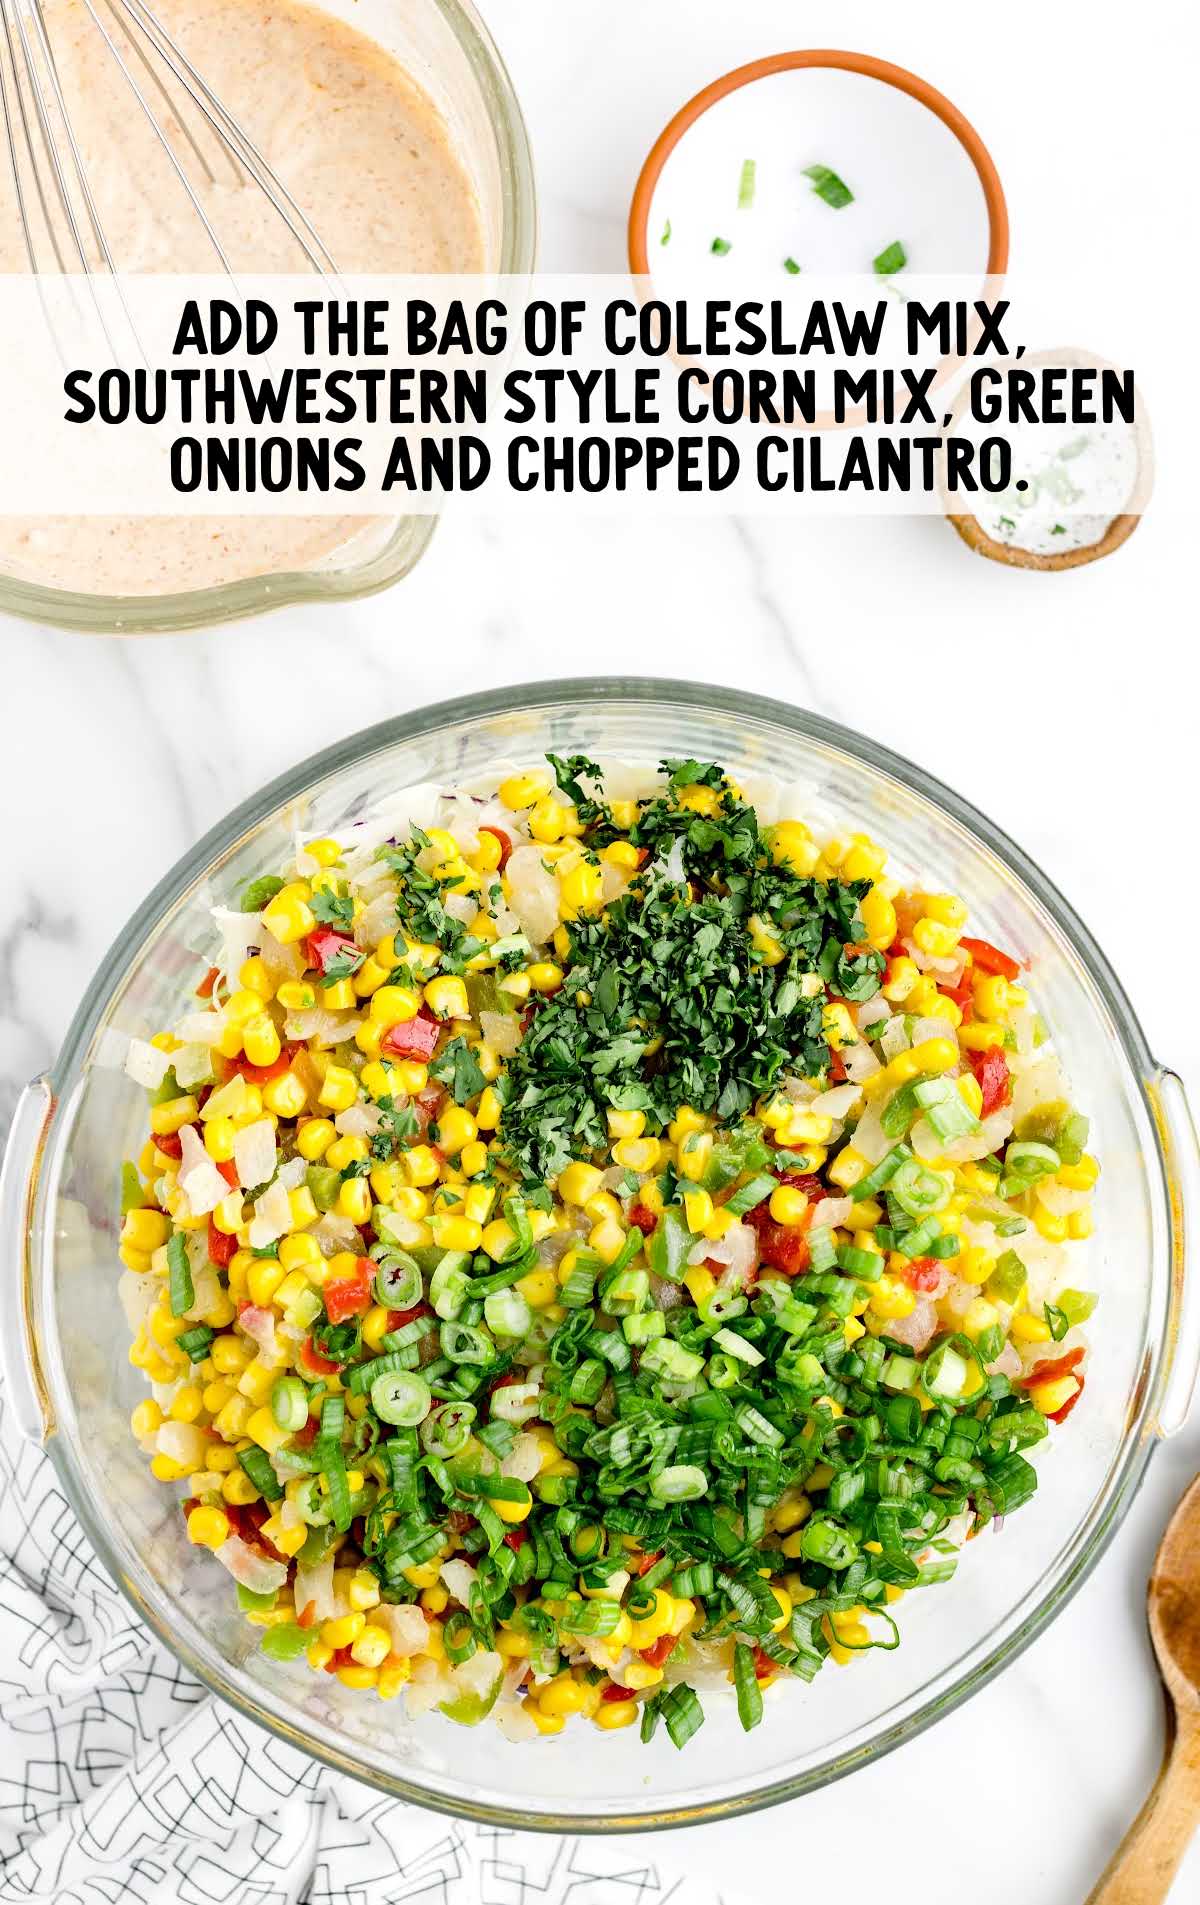 coleslaw mix, southwestern corn mix, green onions and chopped cilantro combined in a bowl